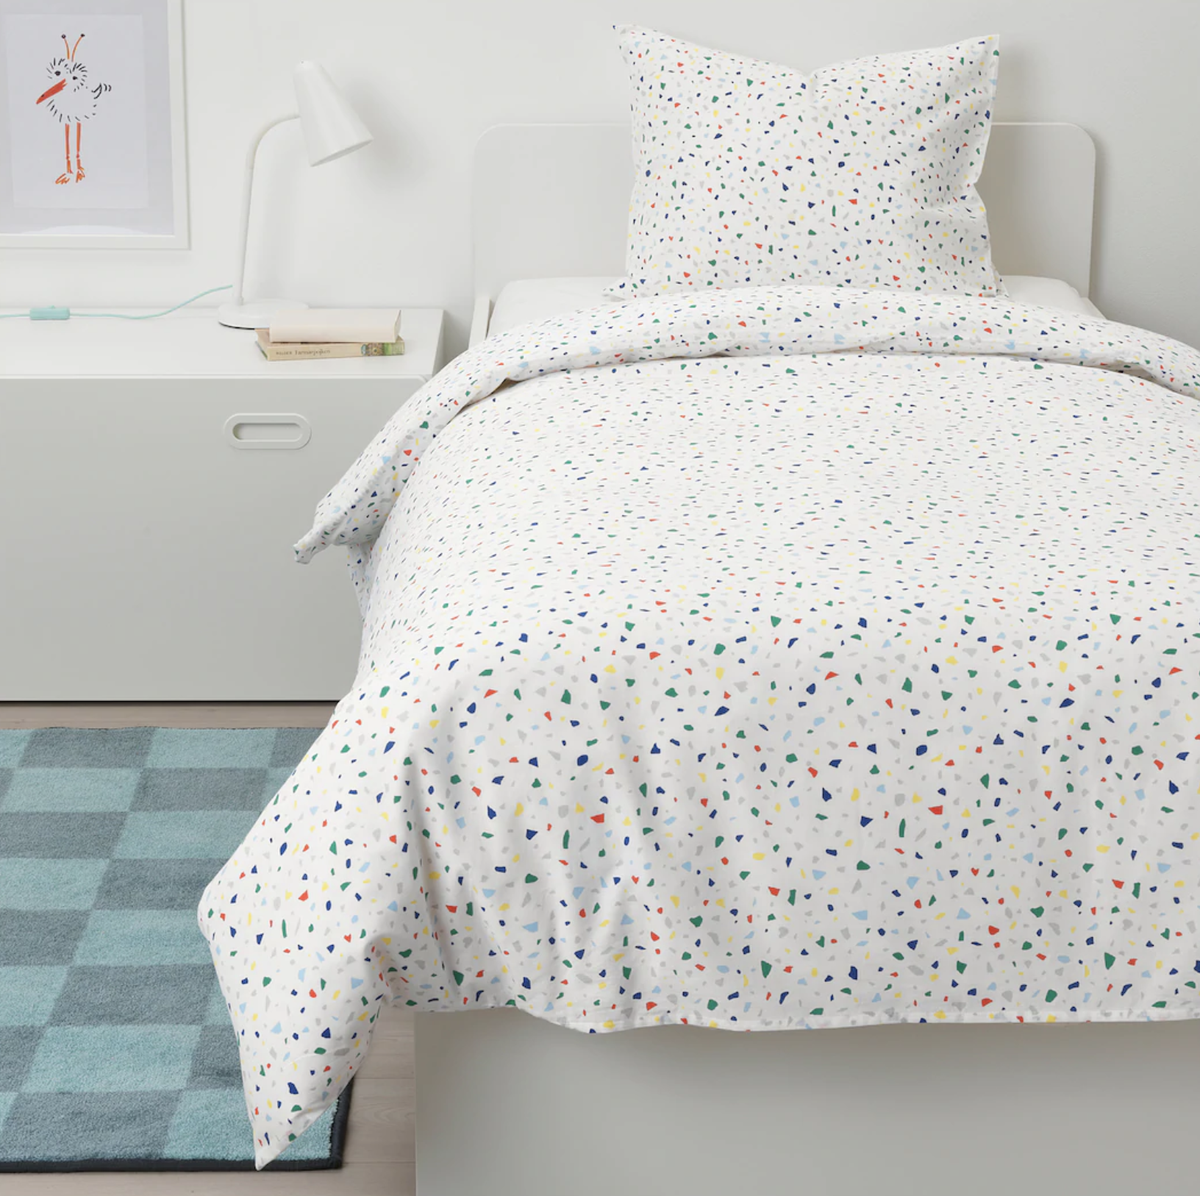 These Ikea Duvet Covers Nail All The 2020 Bedroom Trends For